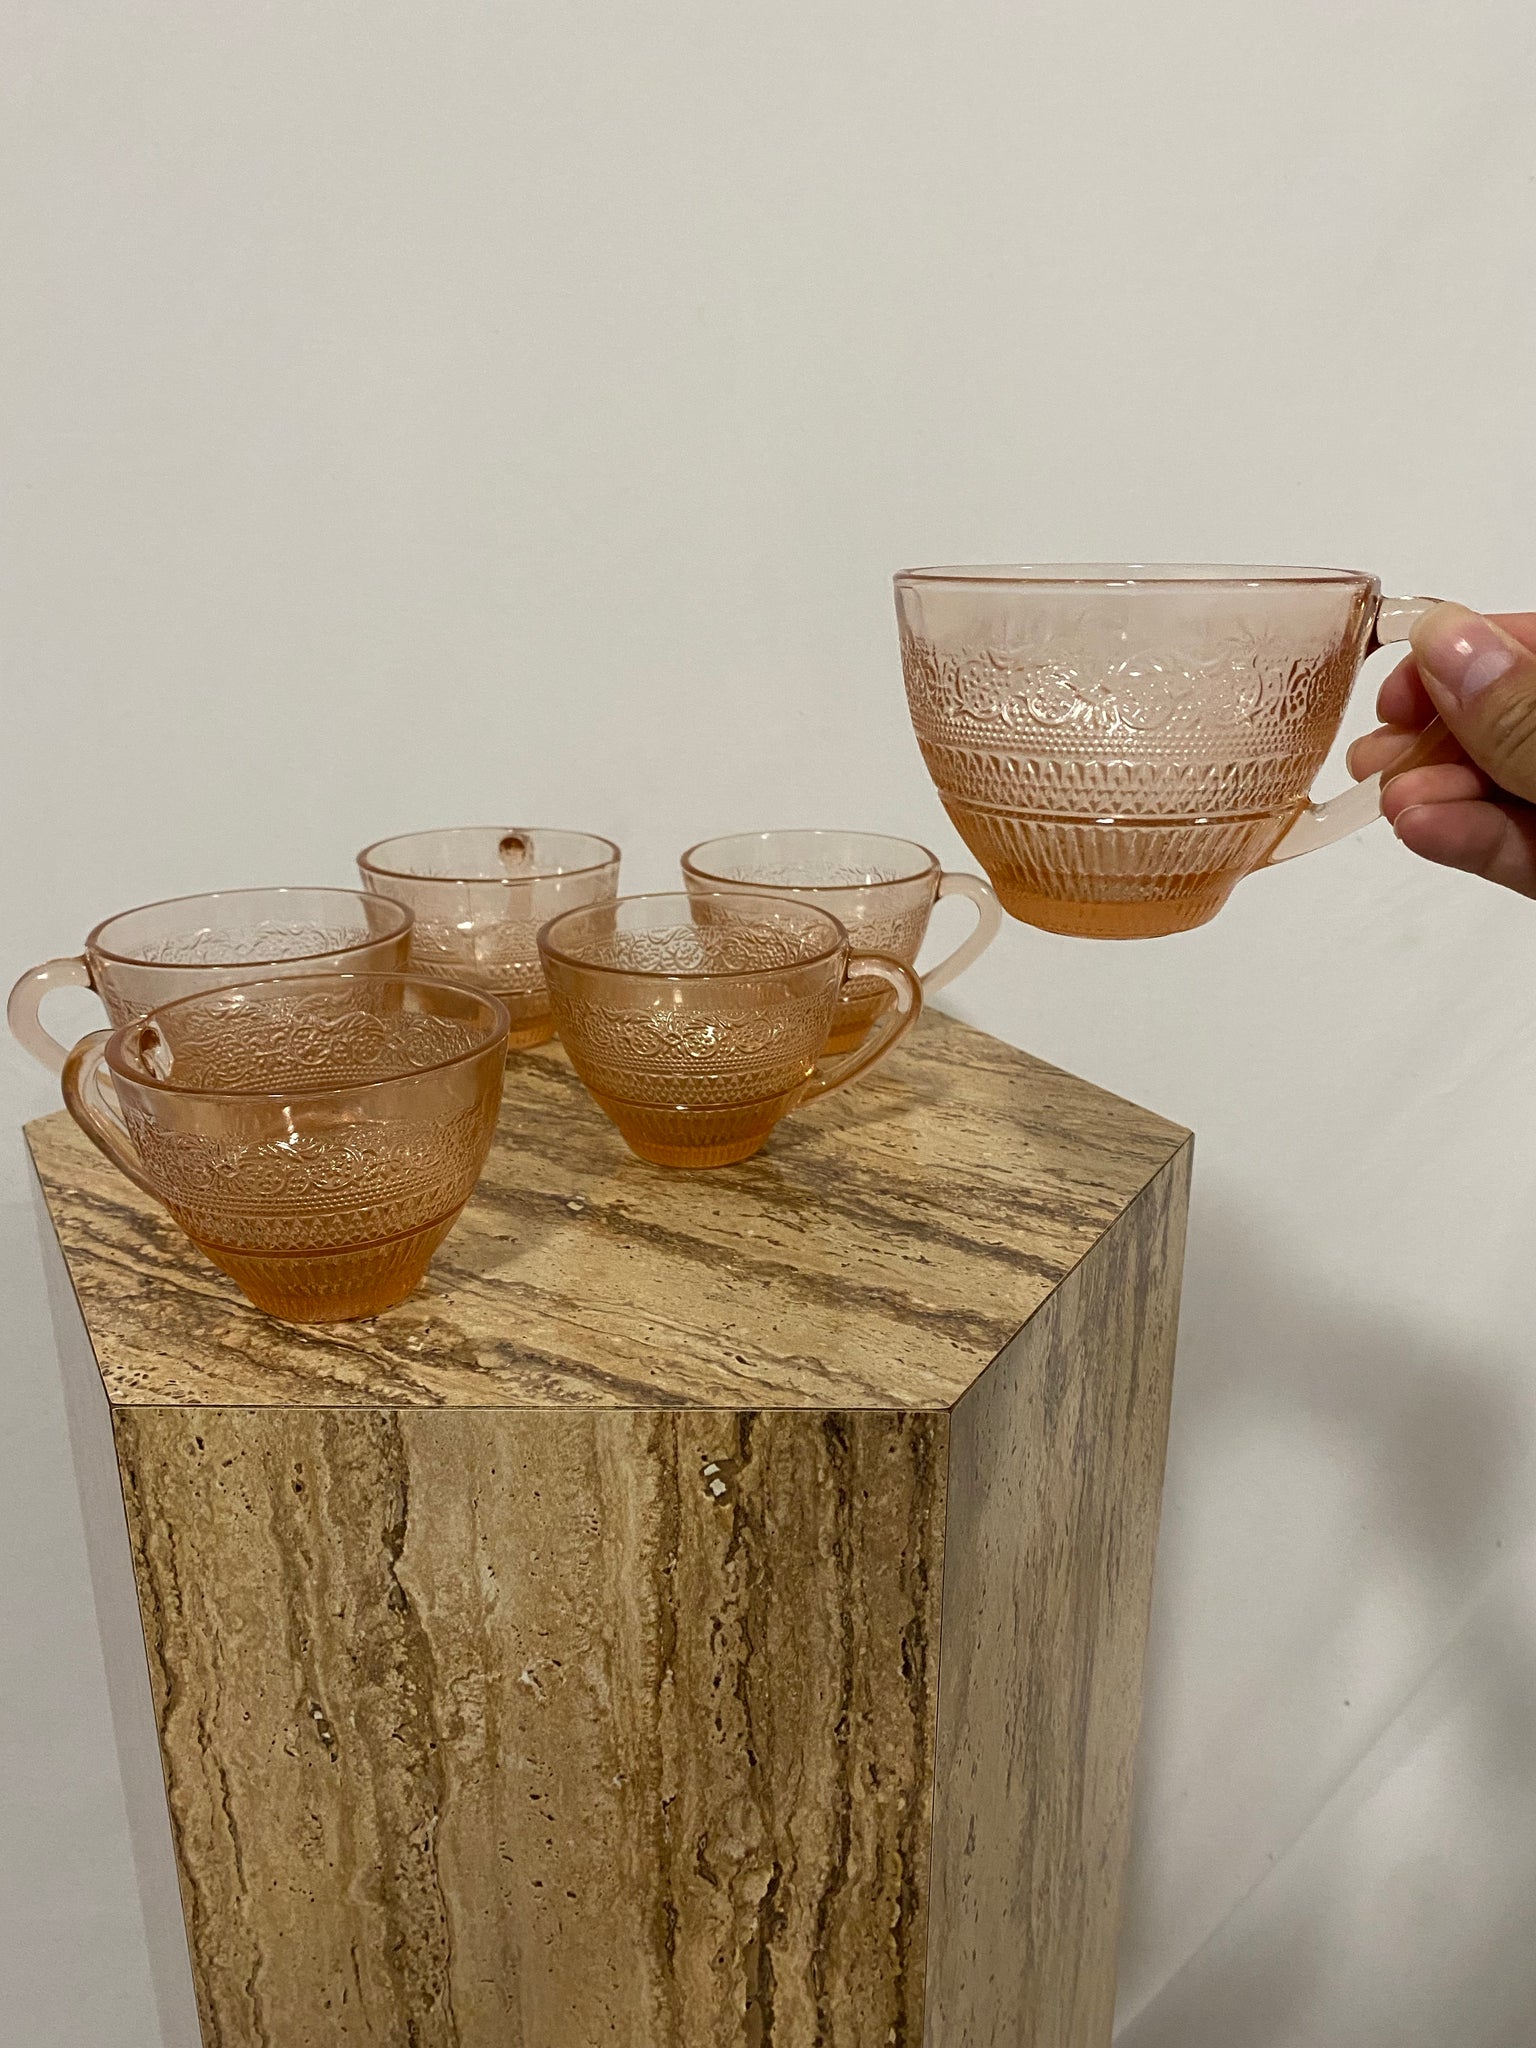 Pink depression glass style cups